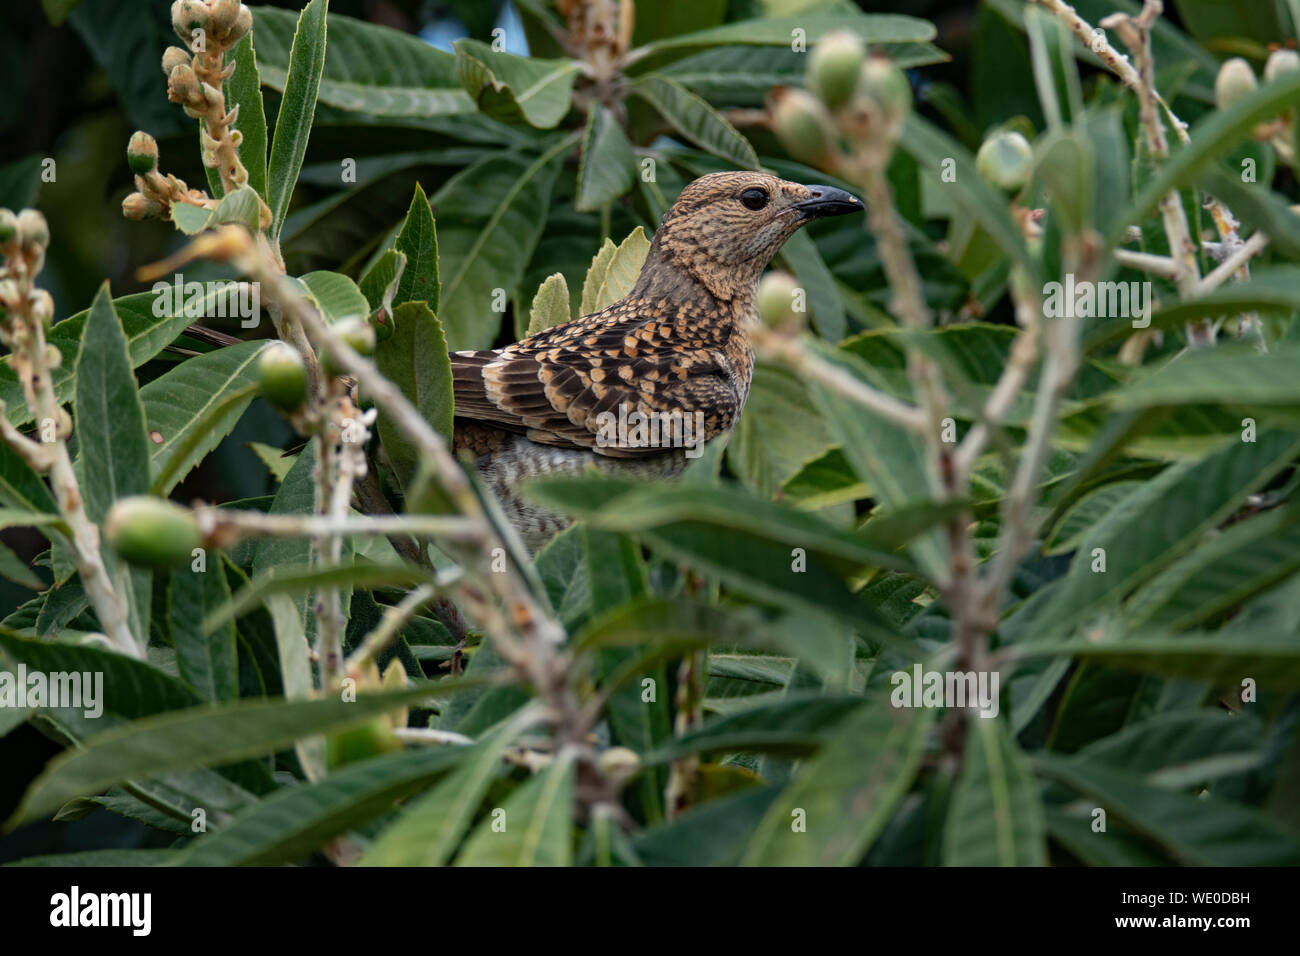 A Spotted Bower Bird staling fruit from a loquat tree Stock Photo